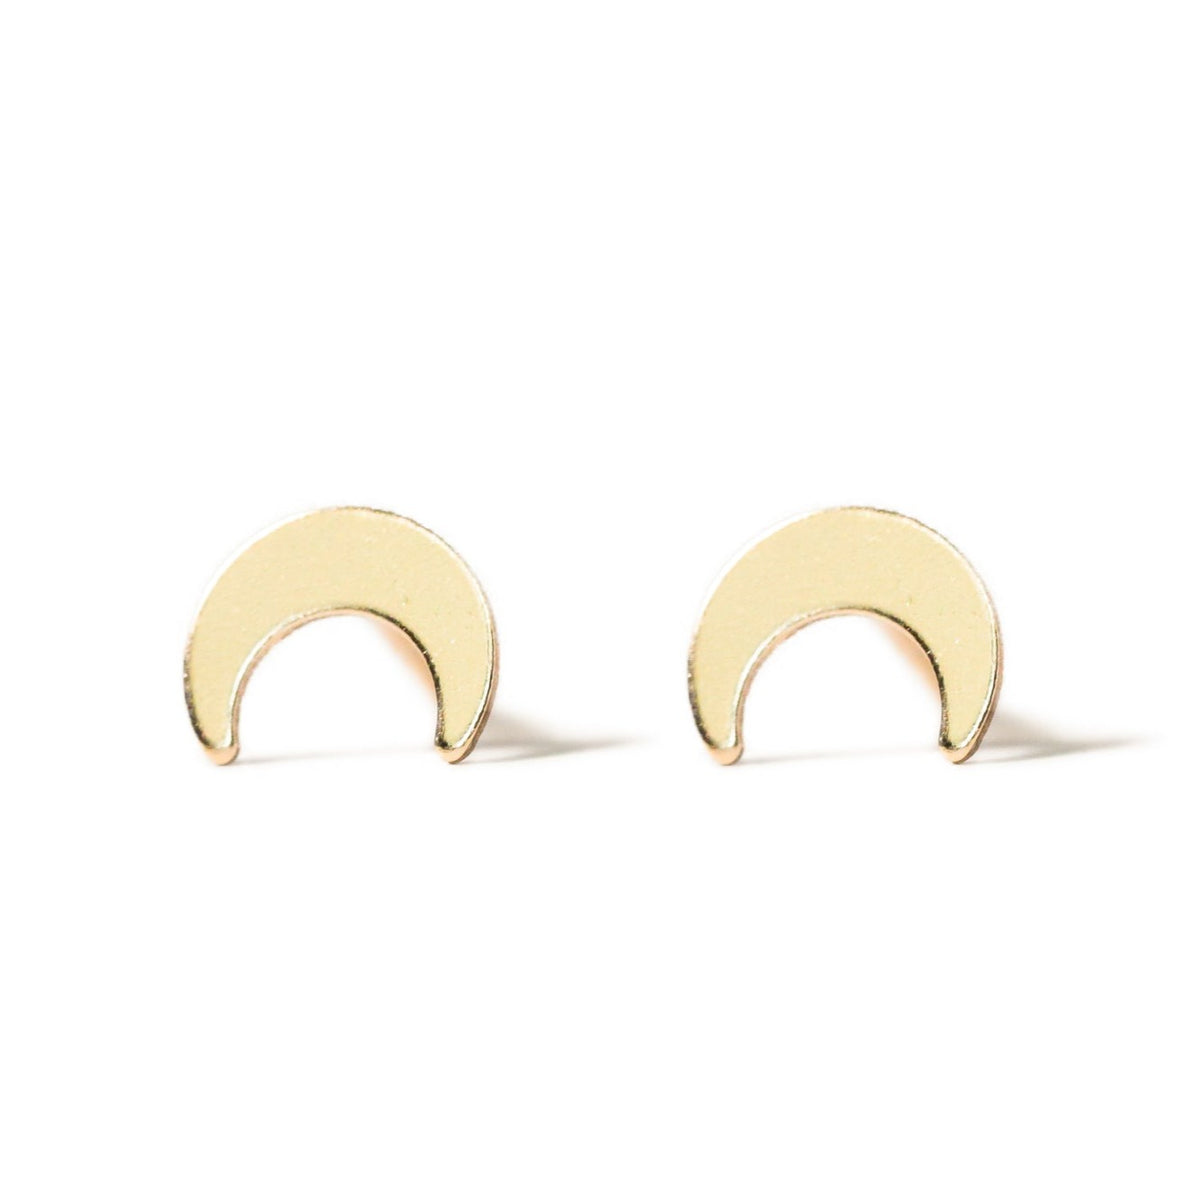 Moon studs - 14K gold filled